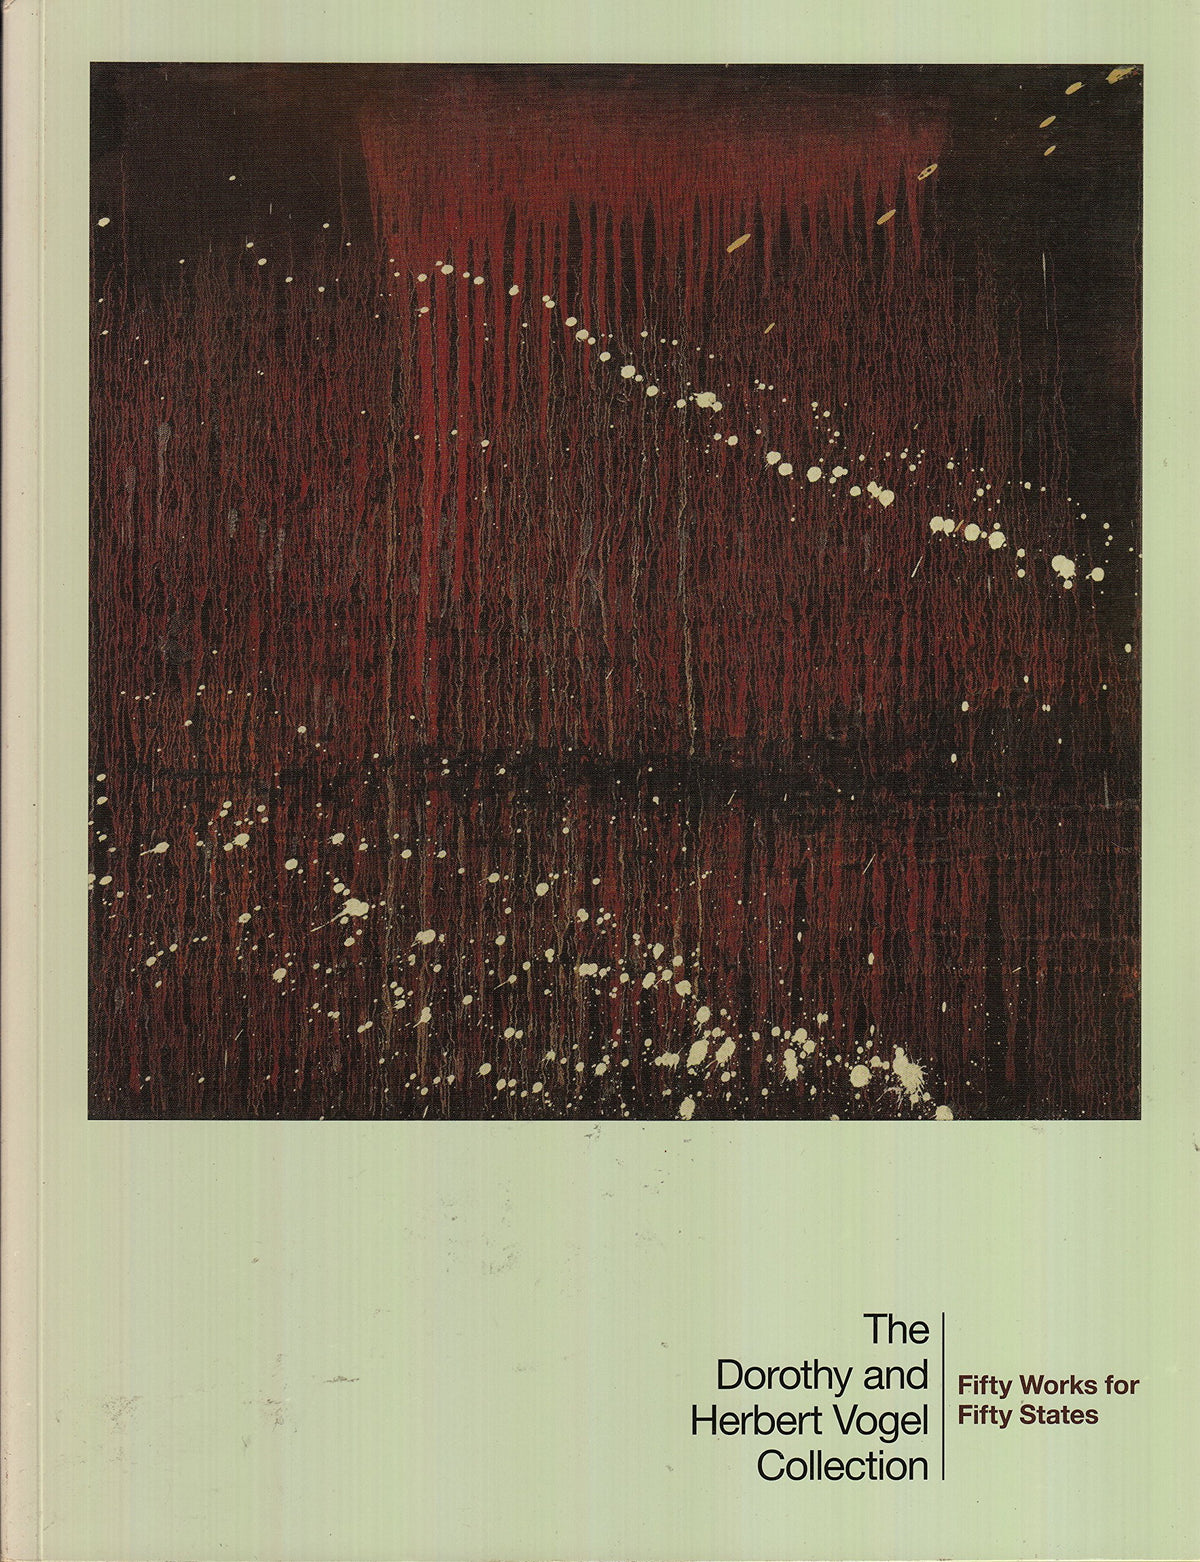 The Dorothy and Herbert Vogel Collection: Fifty Works for Fifty States